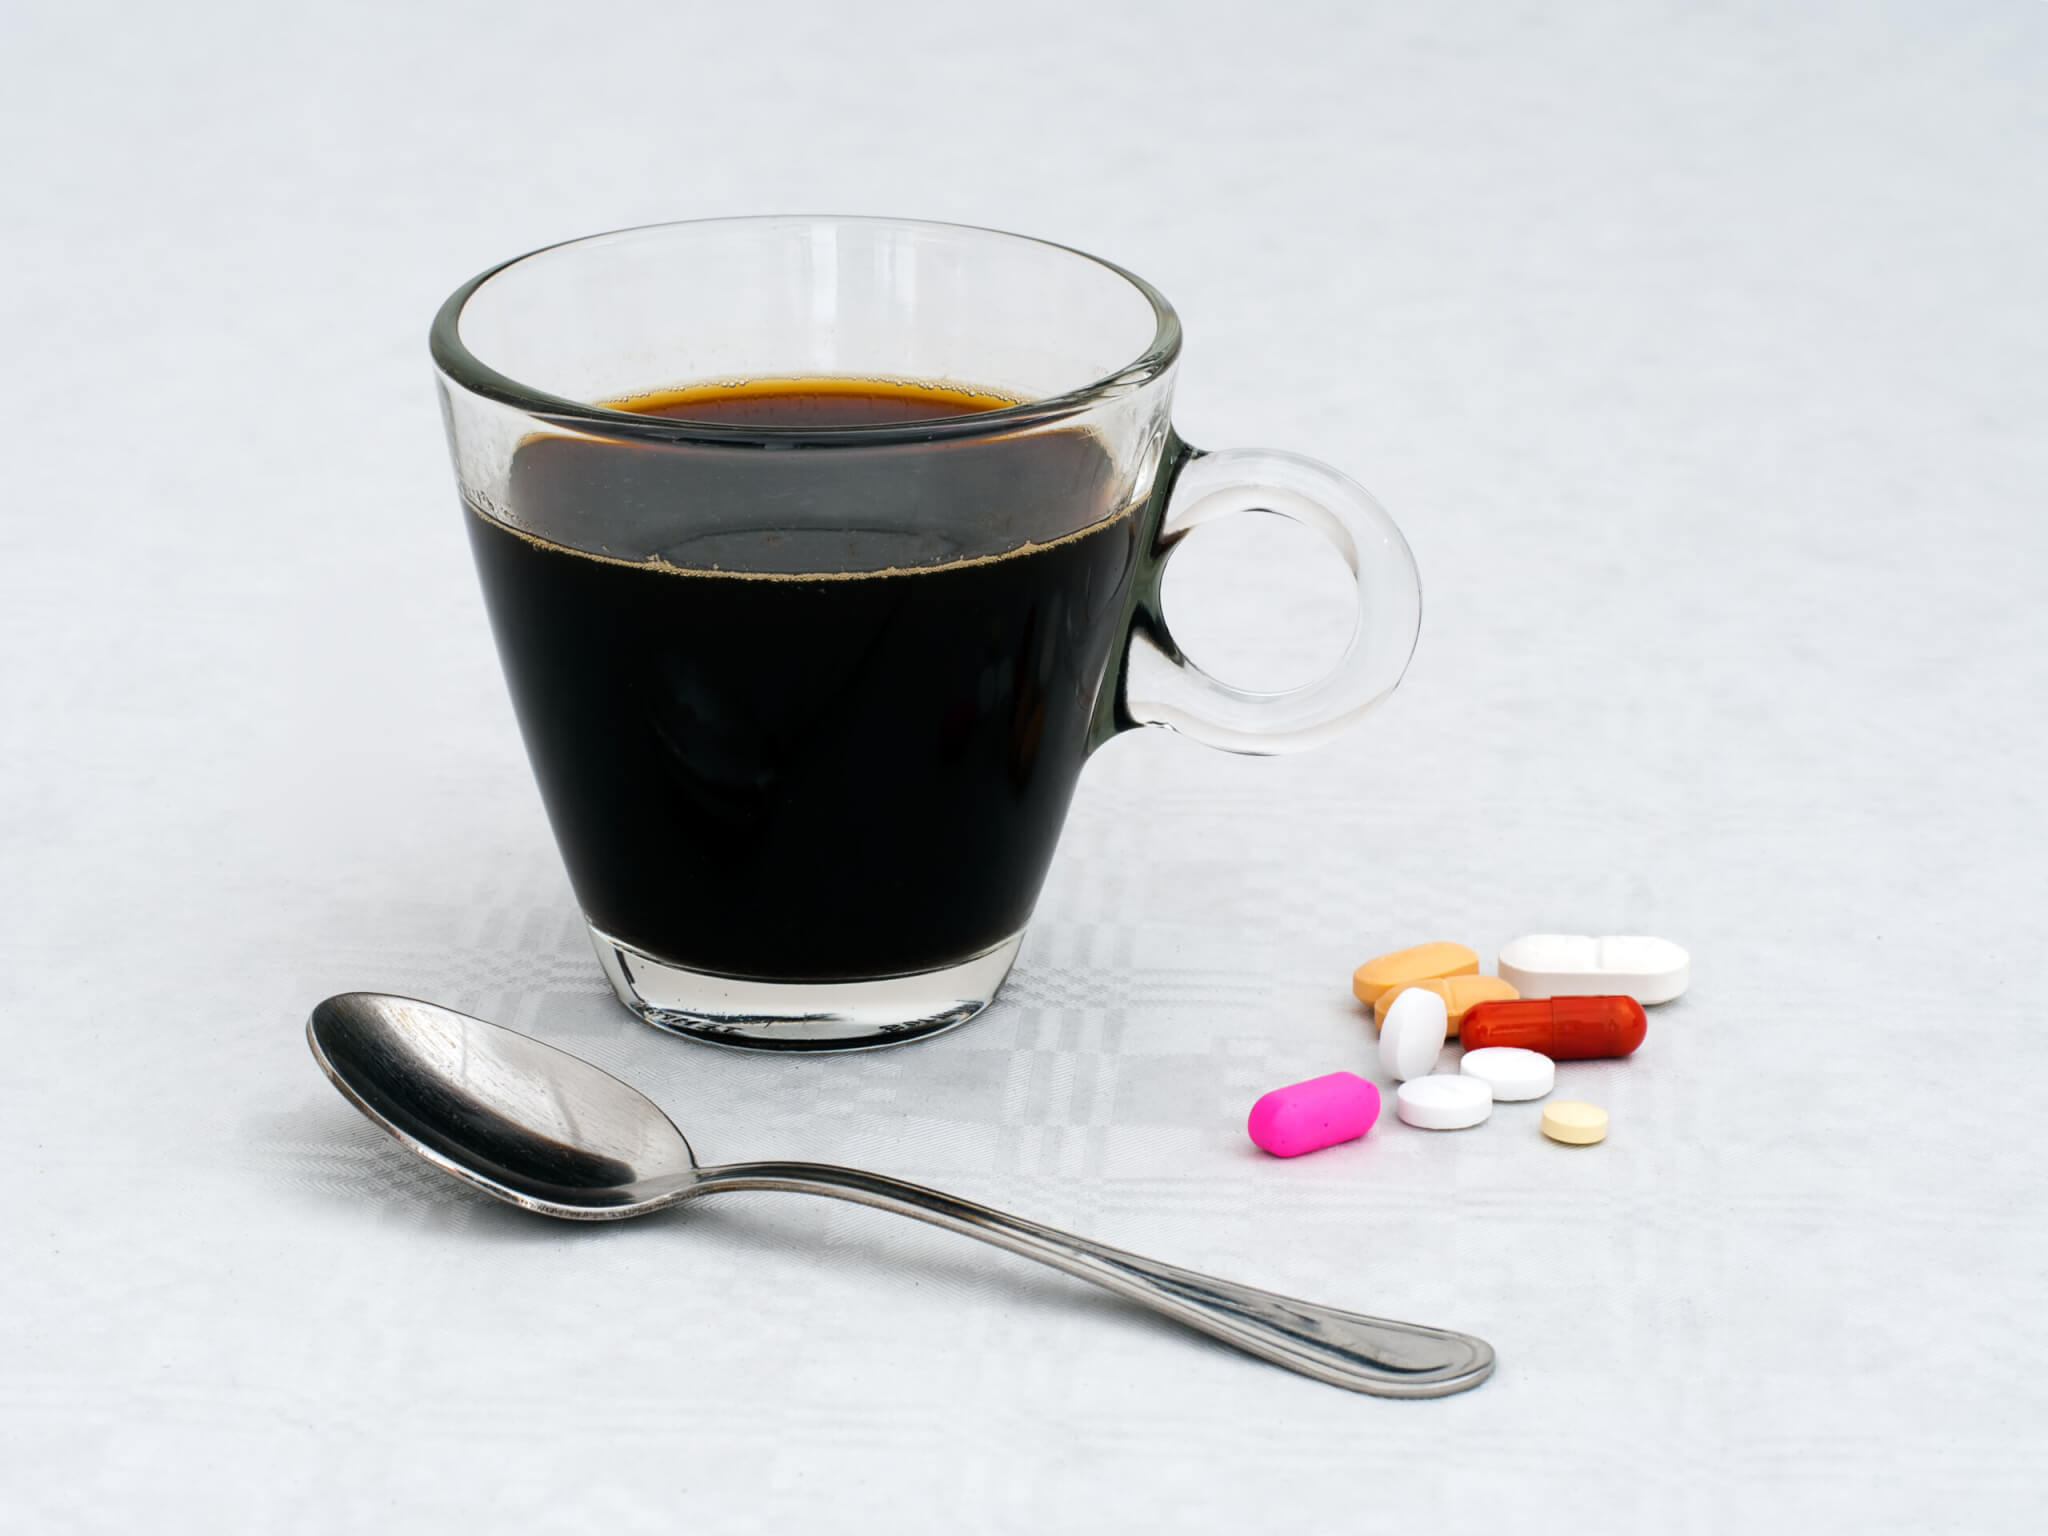 10 medications that may interact with coffee